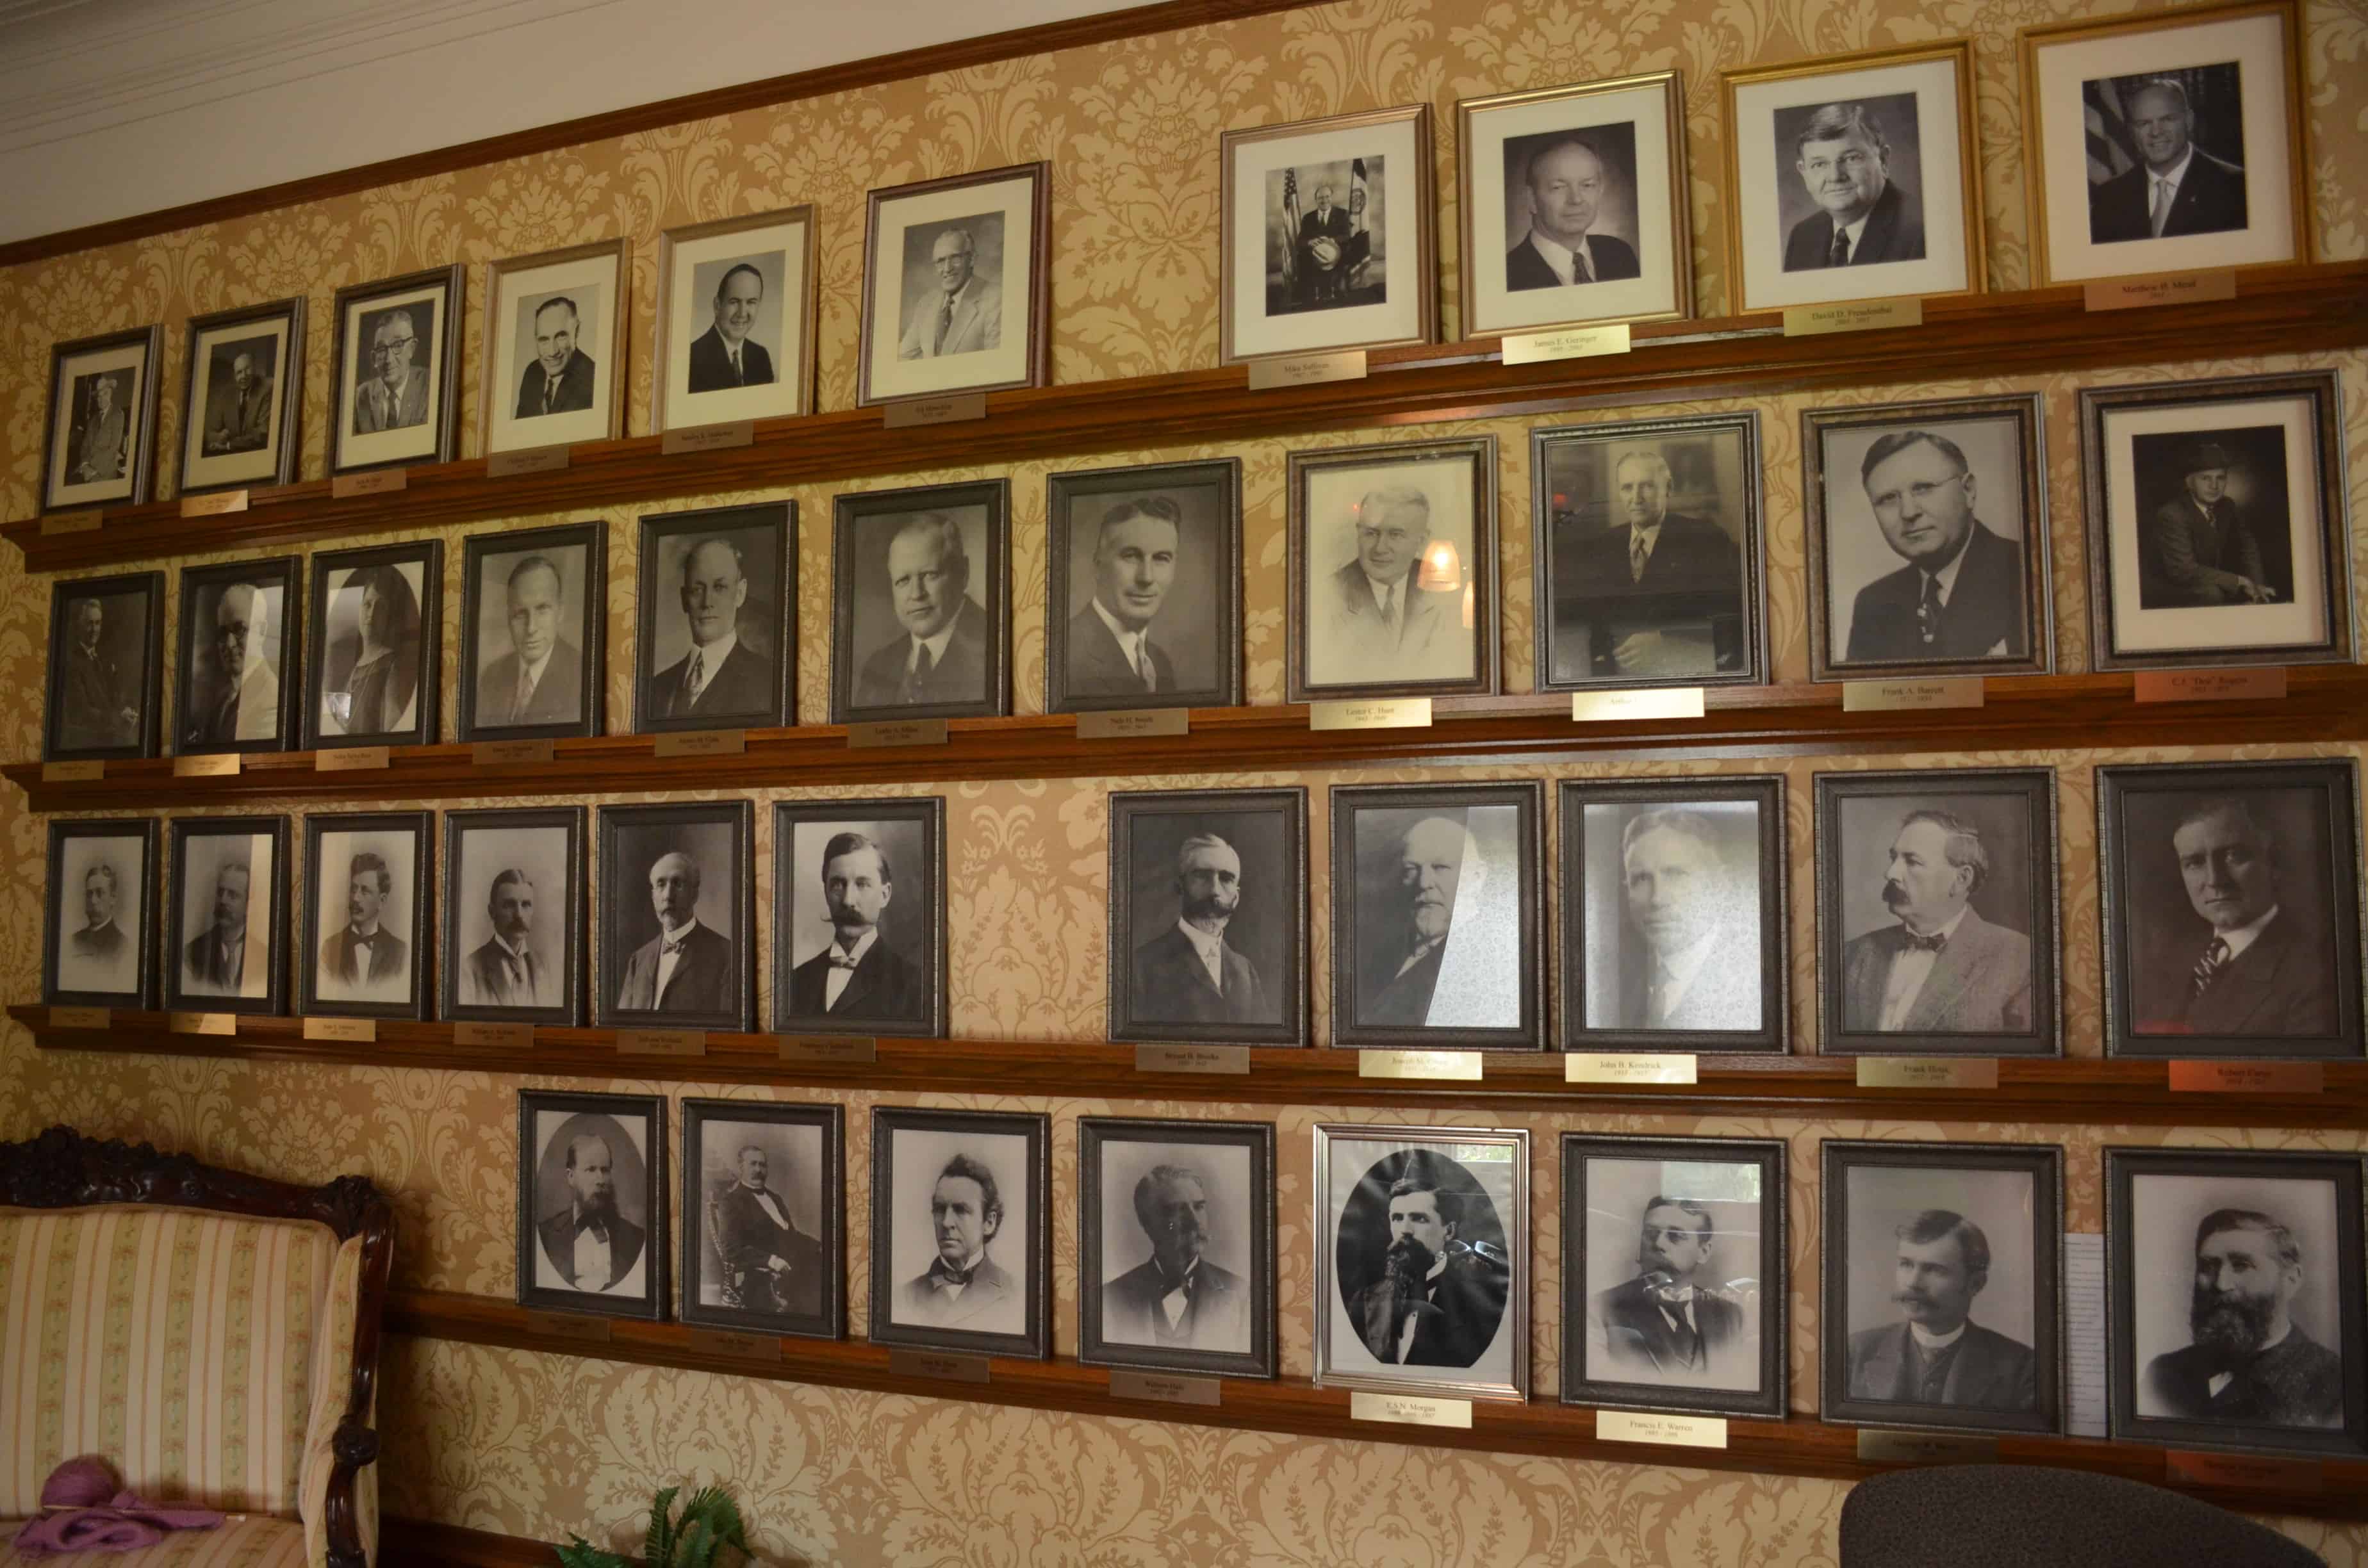 Portraits of Wyoming's governors in the Wyoming Governor's Mansion in Cheyenne